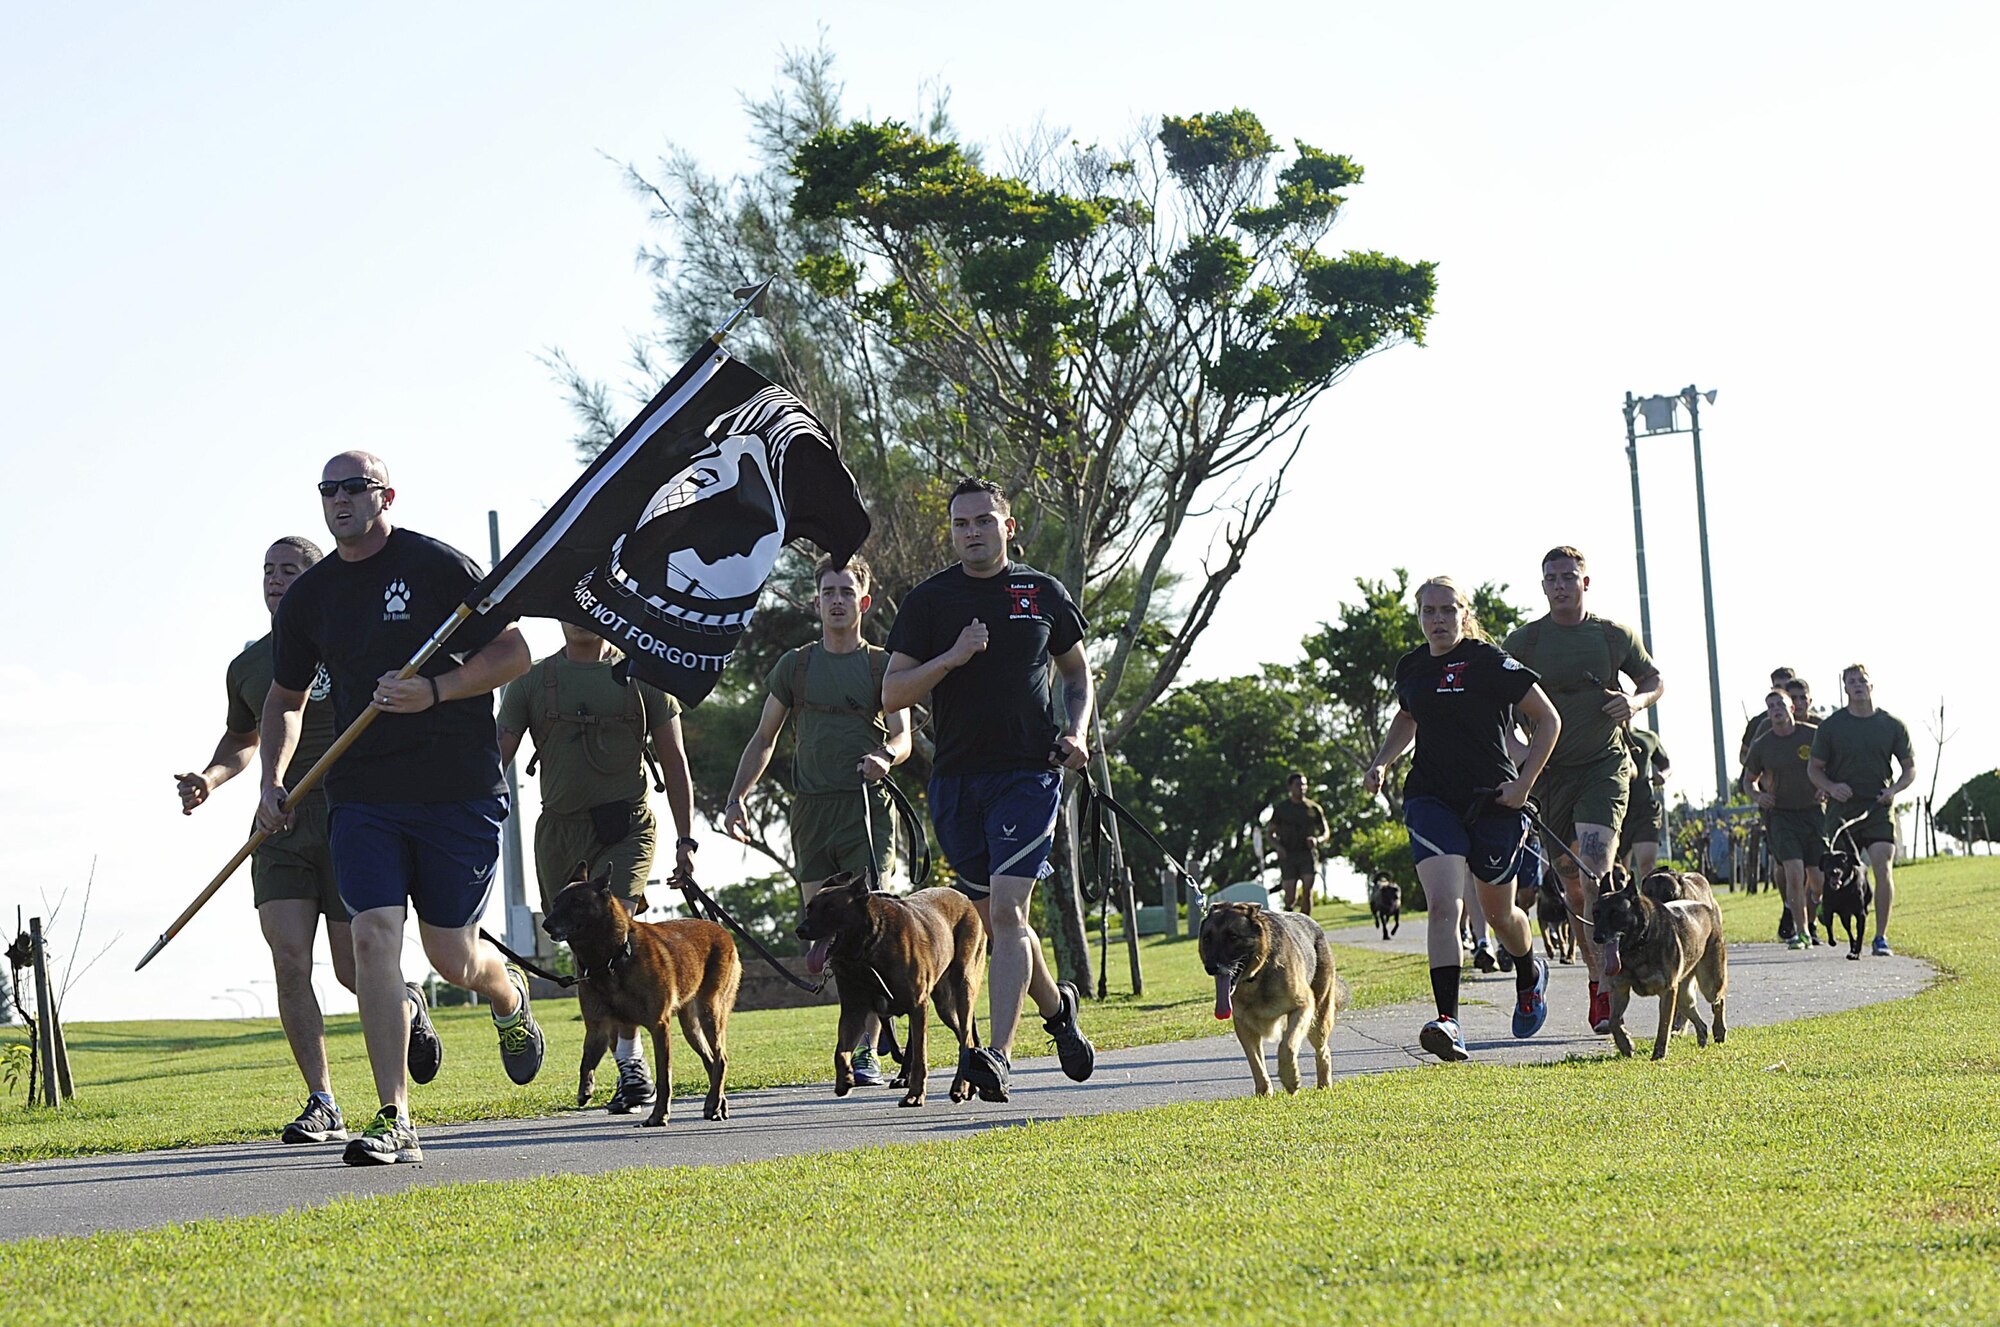 The18th Security Forces Squadron military working dog team escorts the Prisoner of War/Missing in Action flag on the first lap of the run at Marek Park Sept. 17, 2015, on Kadena Air Base, Japan. The flag will be continuously carried around the track by volunteers for the next 24 hours. Also during the run, the names of personnel who were POWs or MIAs, will be read by narrators. (U.S. Air Force photo by Naoto Anazawa/Released)